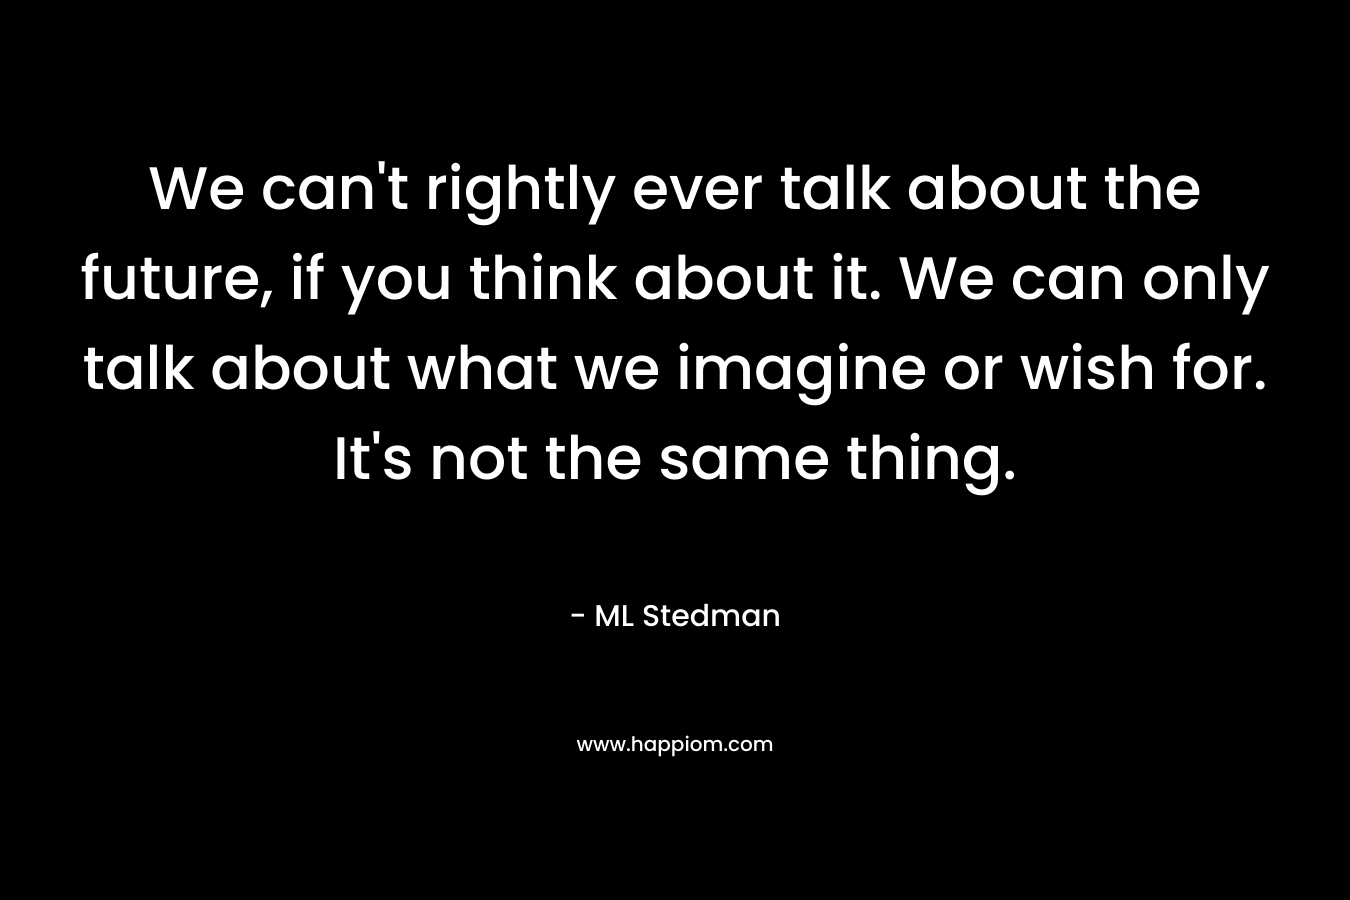 We can’t rightly ever talk about the future, if you think about it. We can only talk about what we imagine or wish for. It’s not the same thing. – ML Stedman